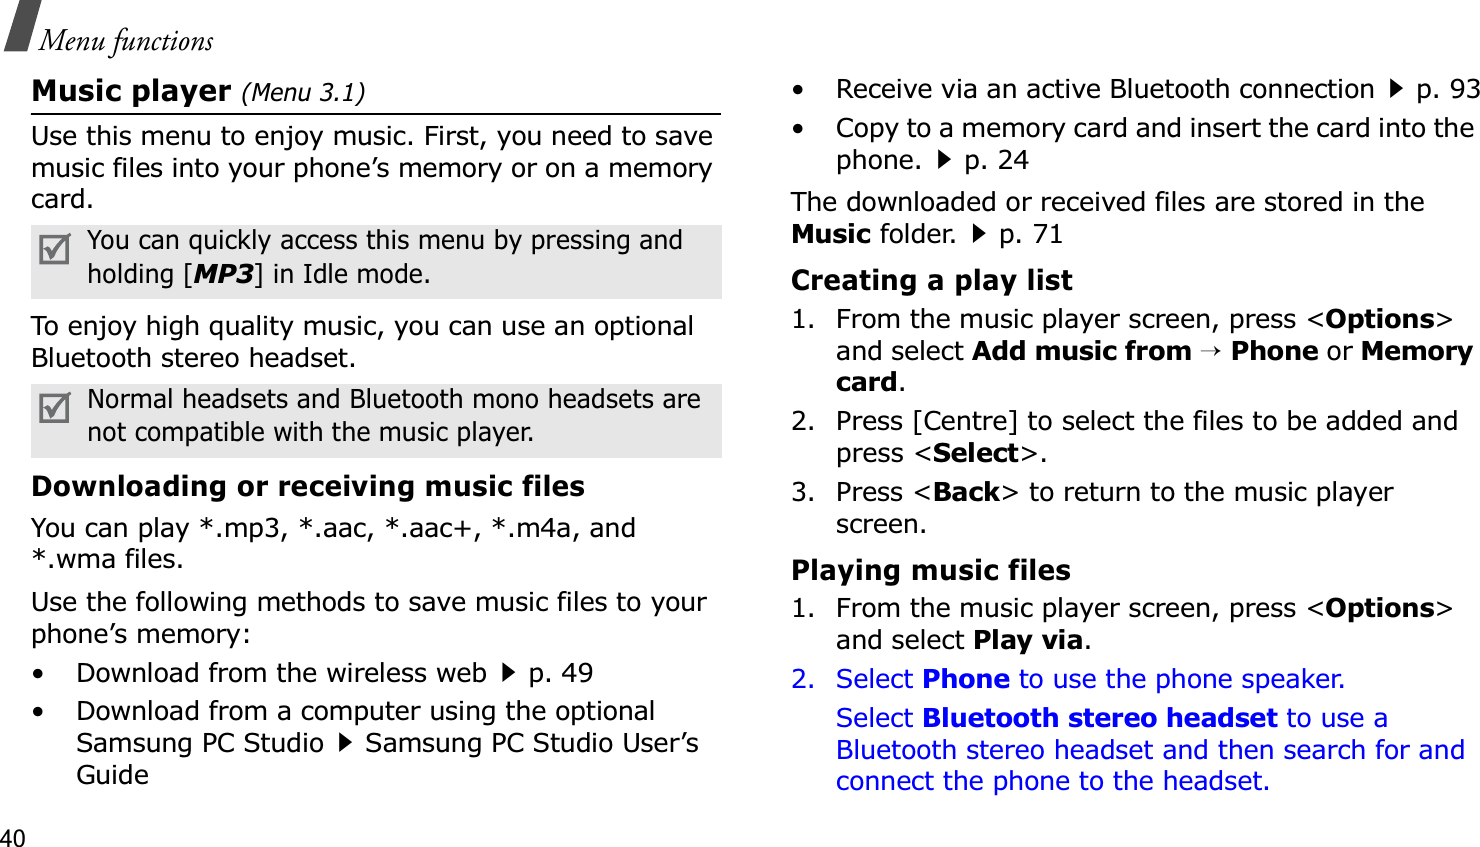 40Menu functionsMusic player (Menu 3.1)Use this menu to enjoy music. First, you need to save music files into your phone’s memory or on a memory card.To enjoy high quality music, you can use an optional Bluetooth stereo headset.Downloading or receiving music filesYou can play *.mp3, *.aac, *.aac+, *.m4a, and *.wma files. Use the following methods to save music files to your phone’s memory:• Download from the wireless webp. 49• Download from a computer using the optional Samsung PC StudioSamsung PC Studio User’s Guide• Receive via an active Bluetooth connectionp. 93• Copy to a memory card and insert the card into the phone.p. 24The downloaded or received files are stored in the Music folder.p. 71Creating a play list1. From the music player screen, press &lt;Options&gt;and select Add music from→Phone or Memory card.2. Press [Centre] to select the files to be added and press &lt;Select&gt;.3. Press &lt;Back&gt; to return to the music player screen.Playing music files1. From the music player screen, press &lt;Options&gt;and select Play via.2. Select Phone to use the phone speaker.Select Bluetooth stereo headset to use a Bluetooth stereo headset and then search for and connect the phone to the headset.You can quickly access this menu by pressing and holding [MP3] in Idle mode.Normal headsets and Bluetooth mono headsets are not compatible with the music player.